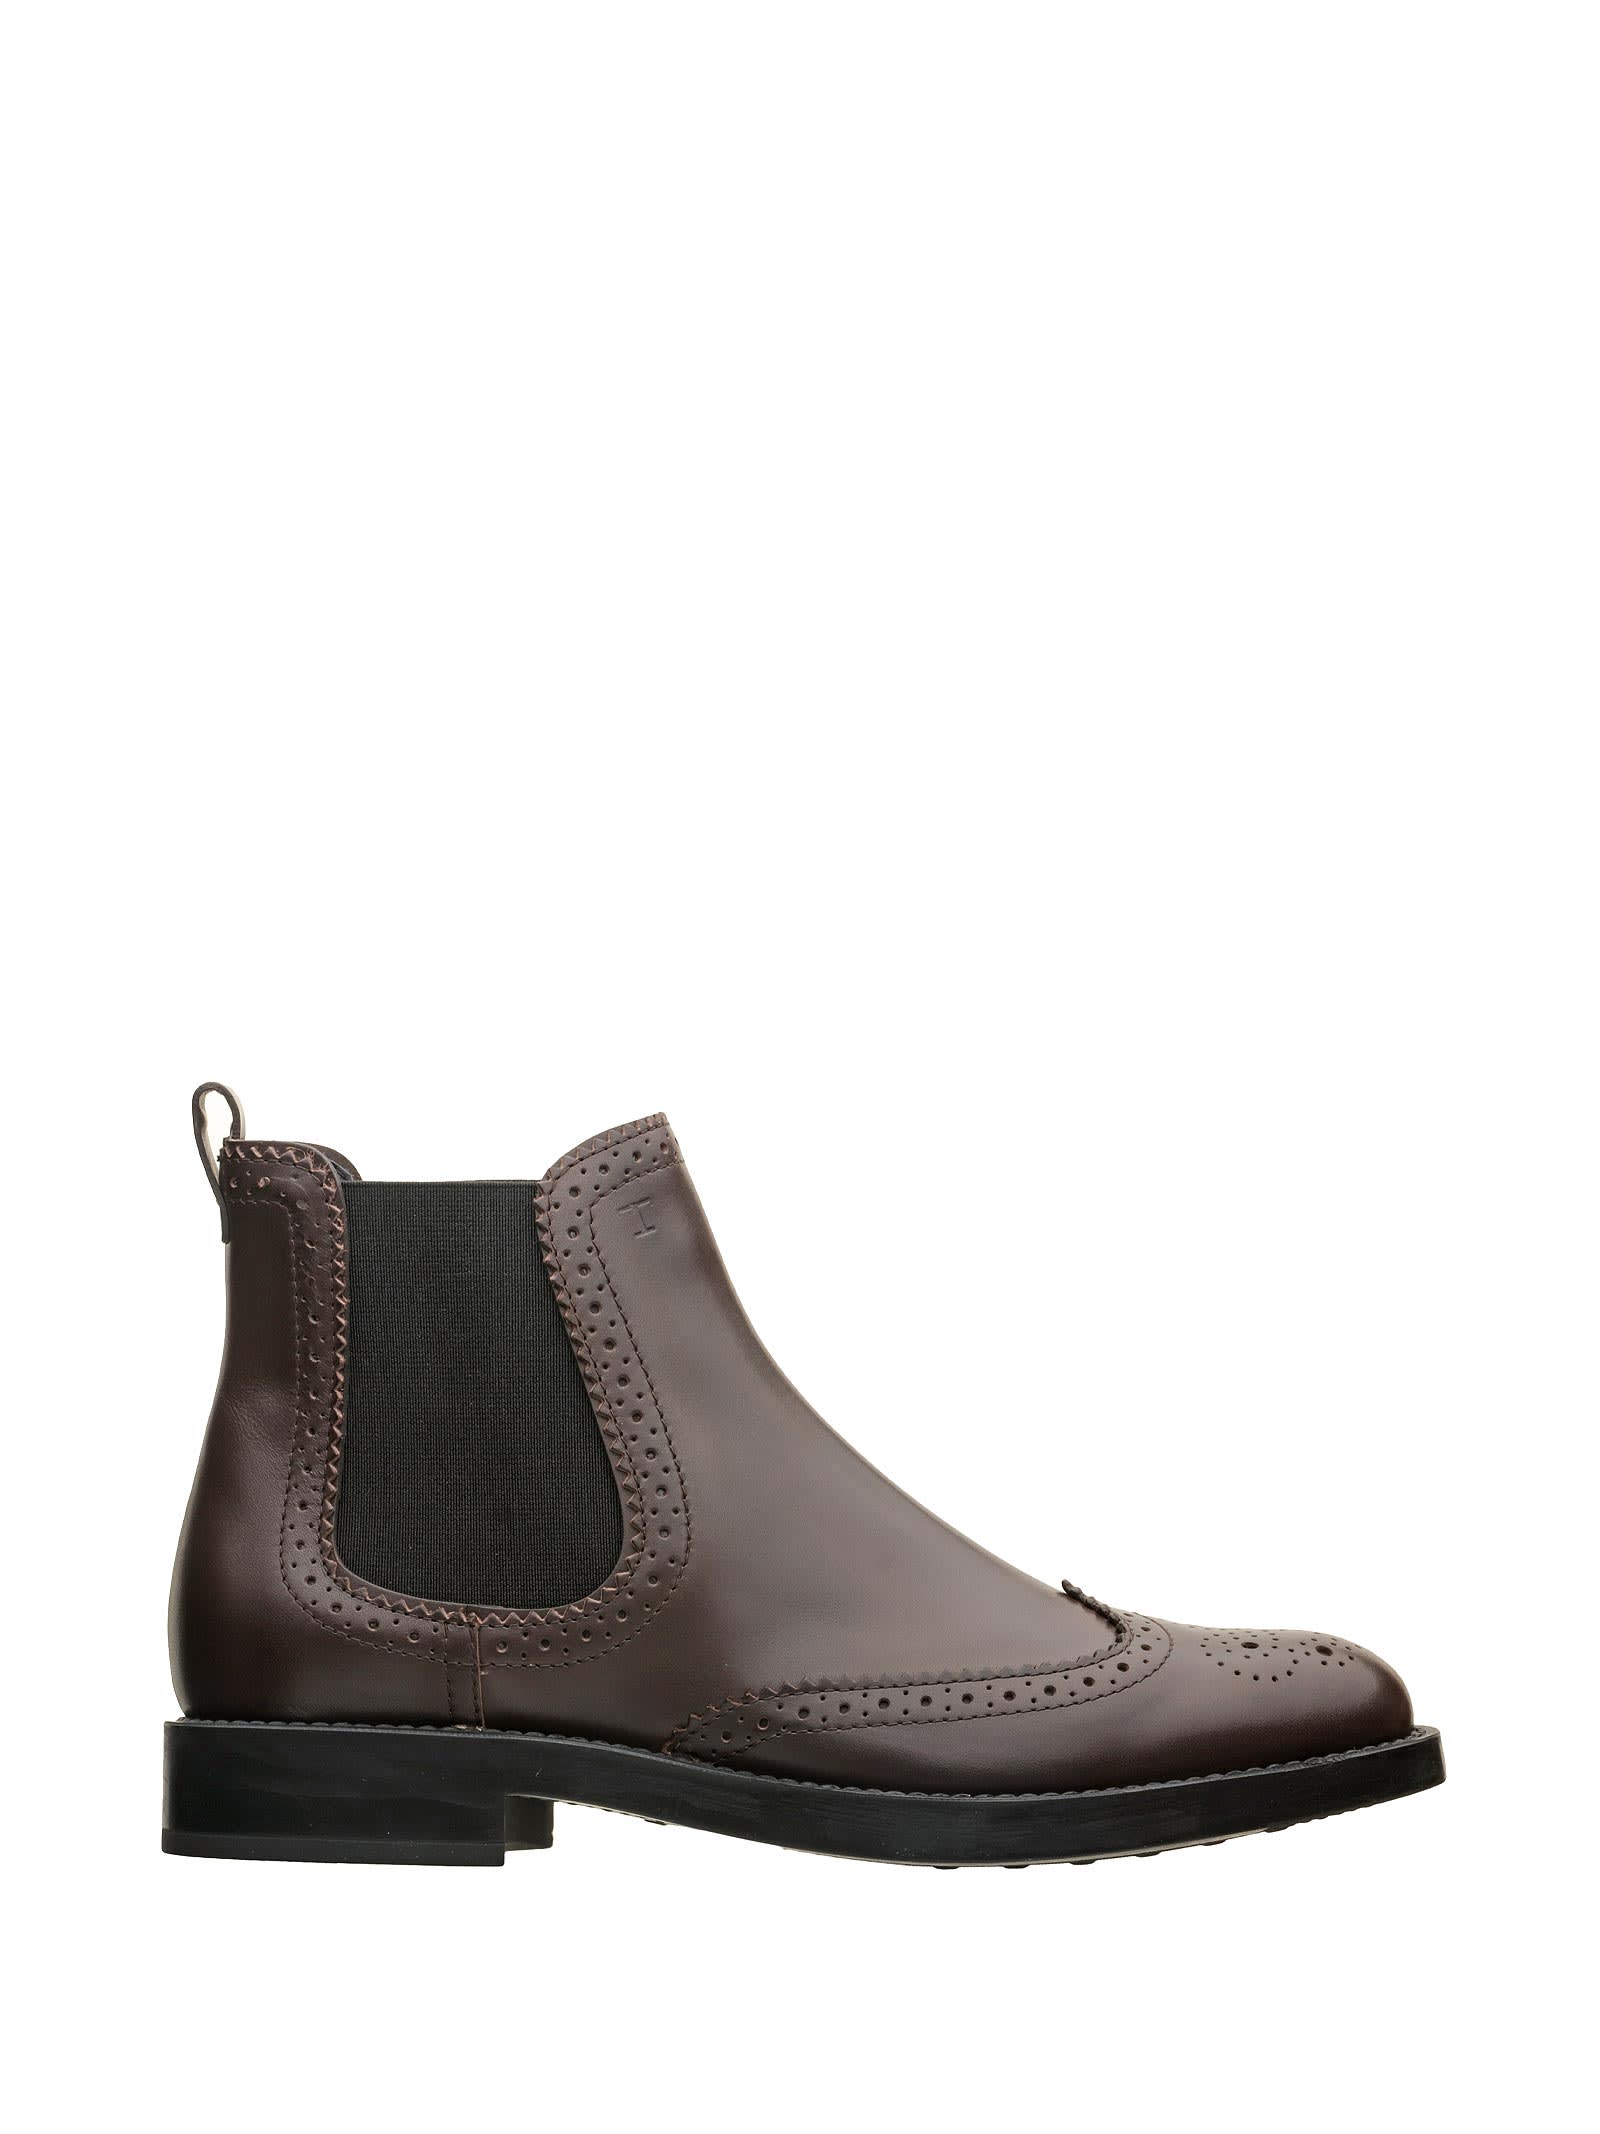 Buy Tods Chelsea Boots online, shop Tods shoes with free shipping